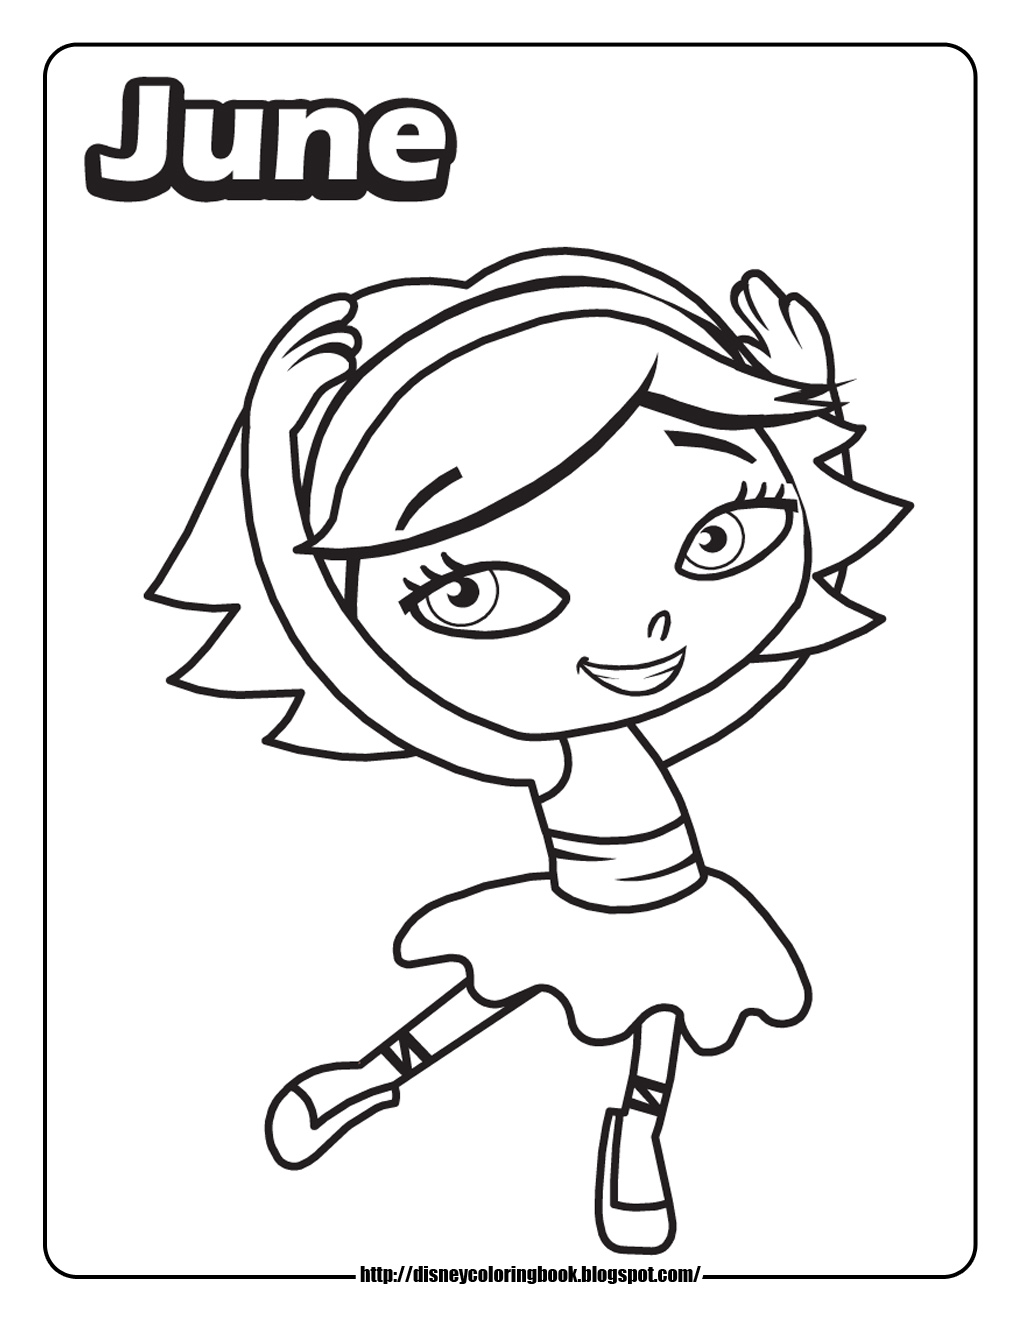 Little Einsteins 1: Free Disney Coloring Sheets | Team colors